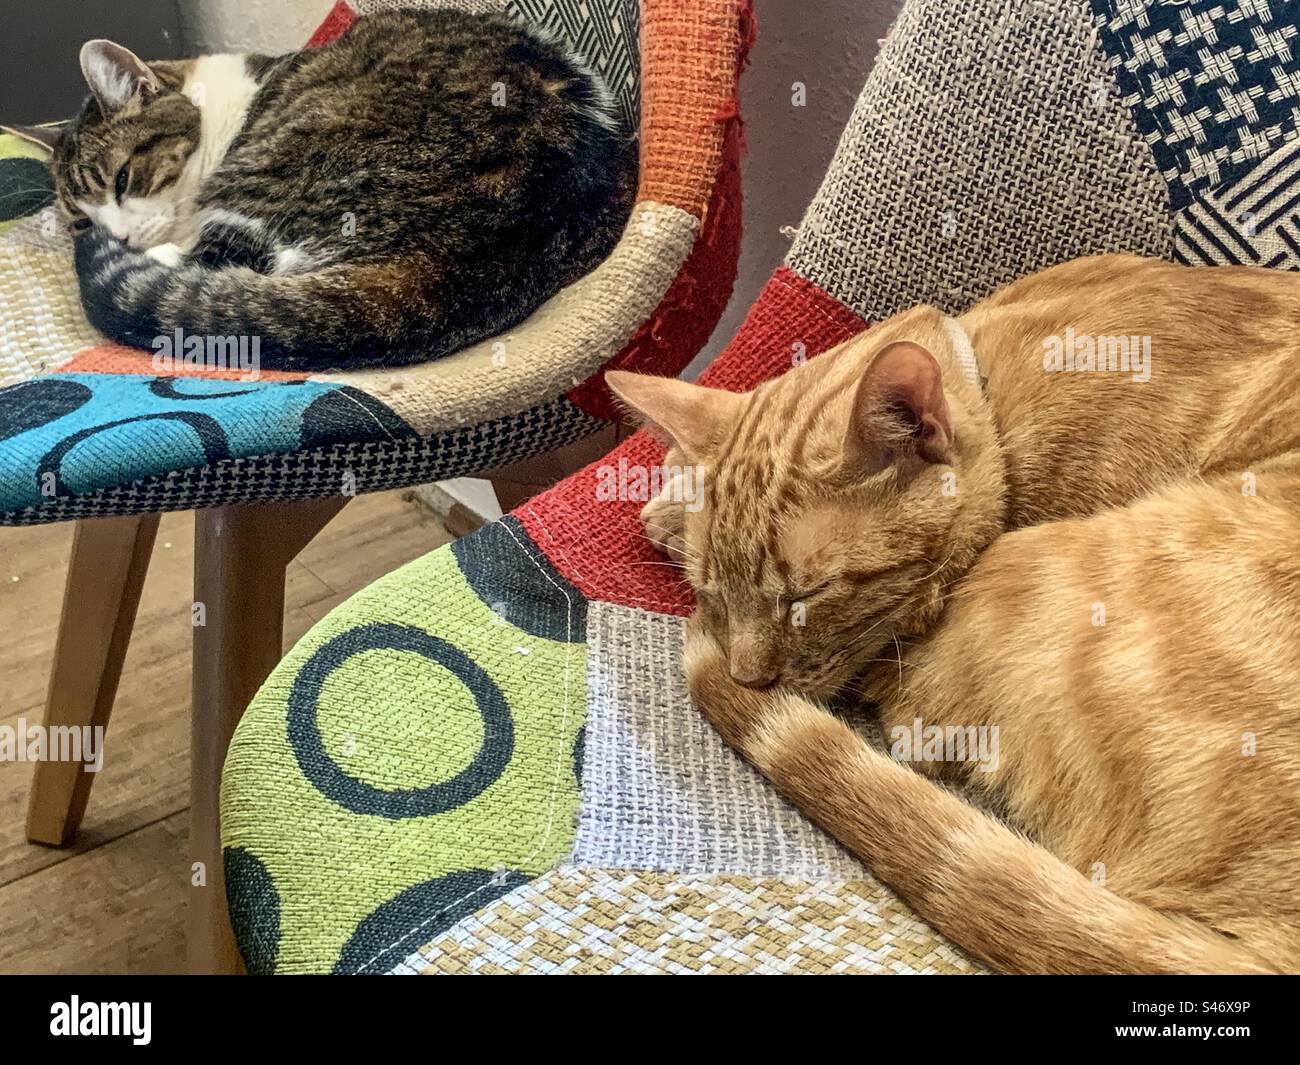 2 cats curled up asleep on colourful chairs Stock Photo